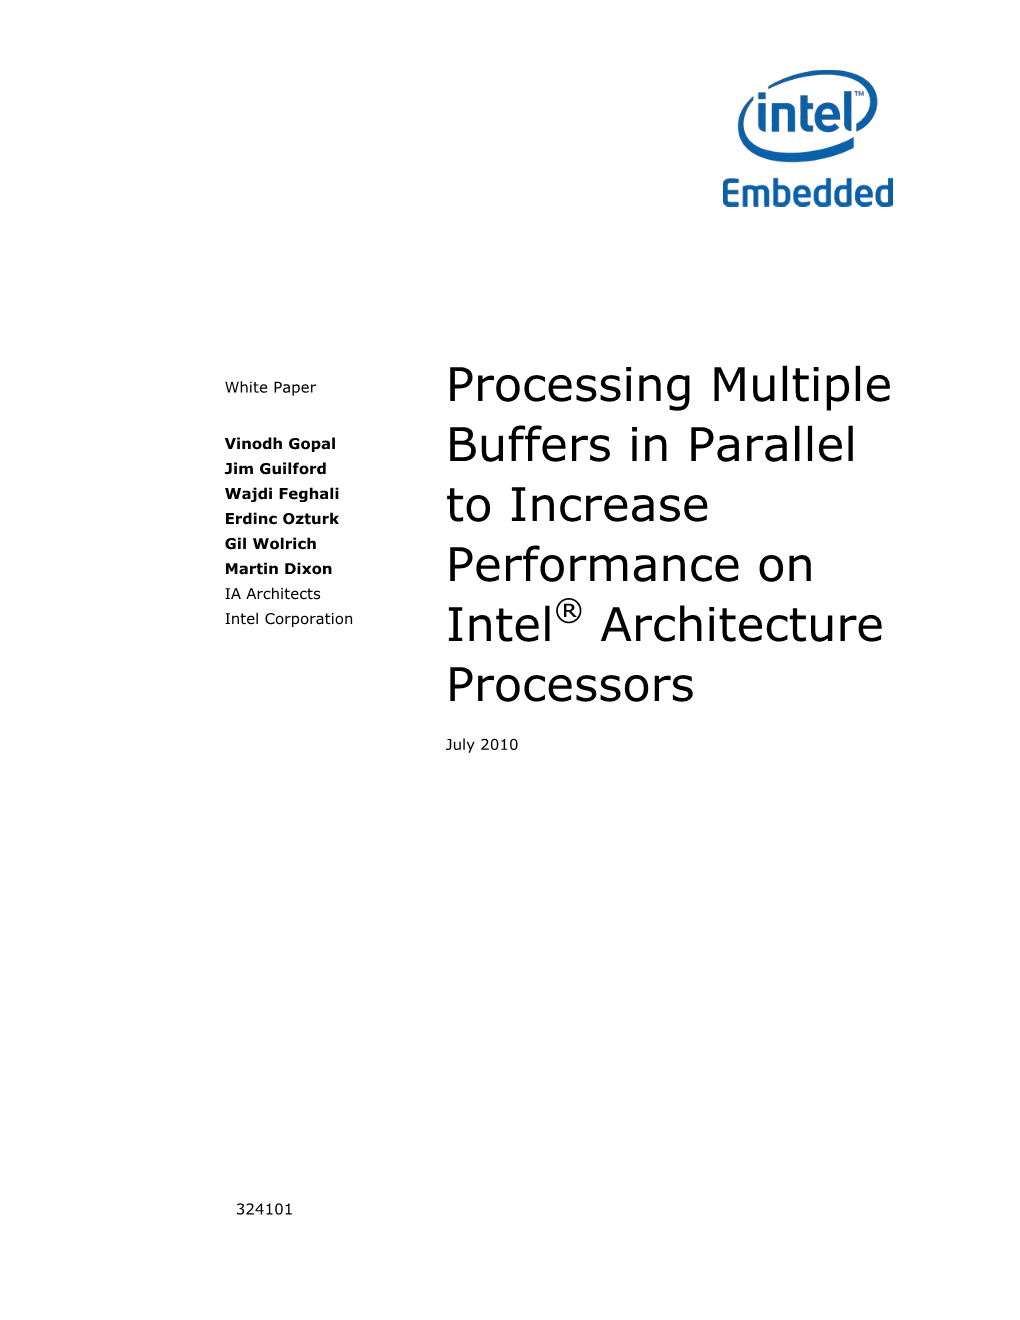 Processing Multiple Buffers in Parallel to Increase Performance on Intel